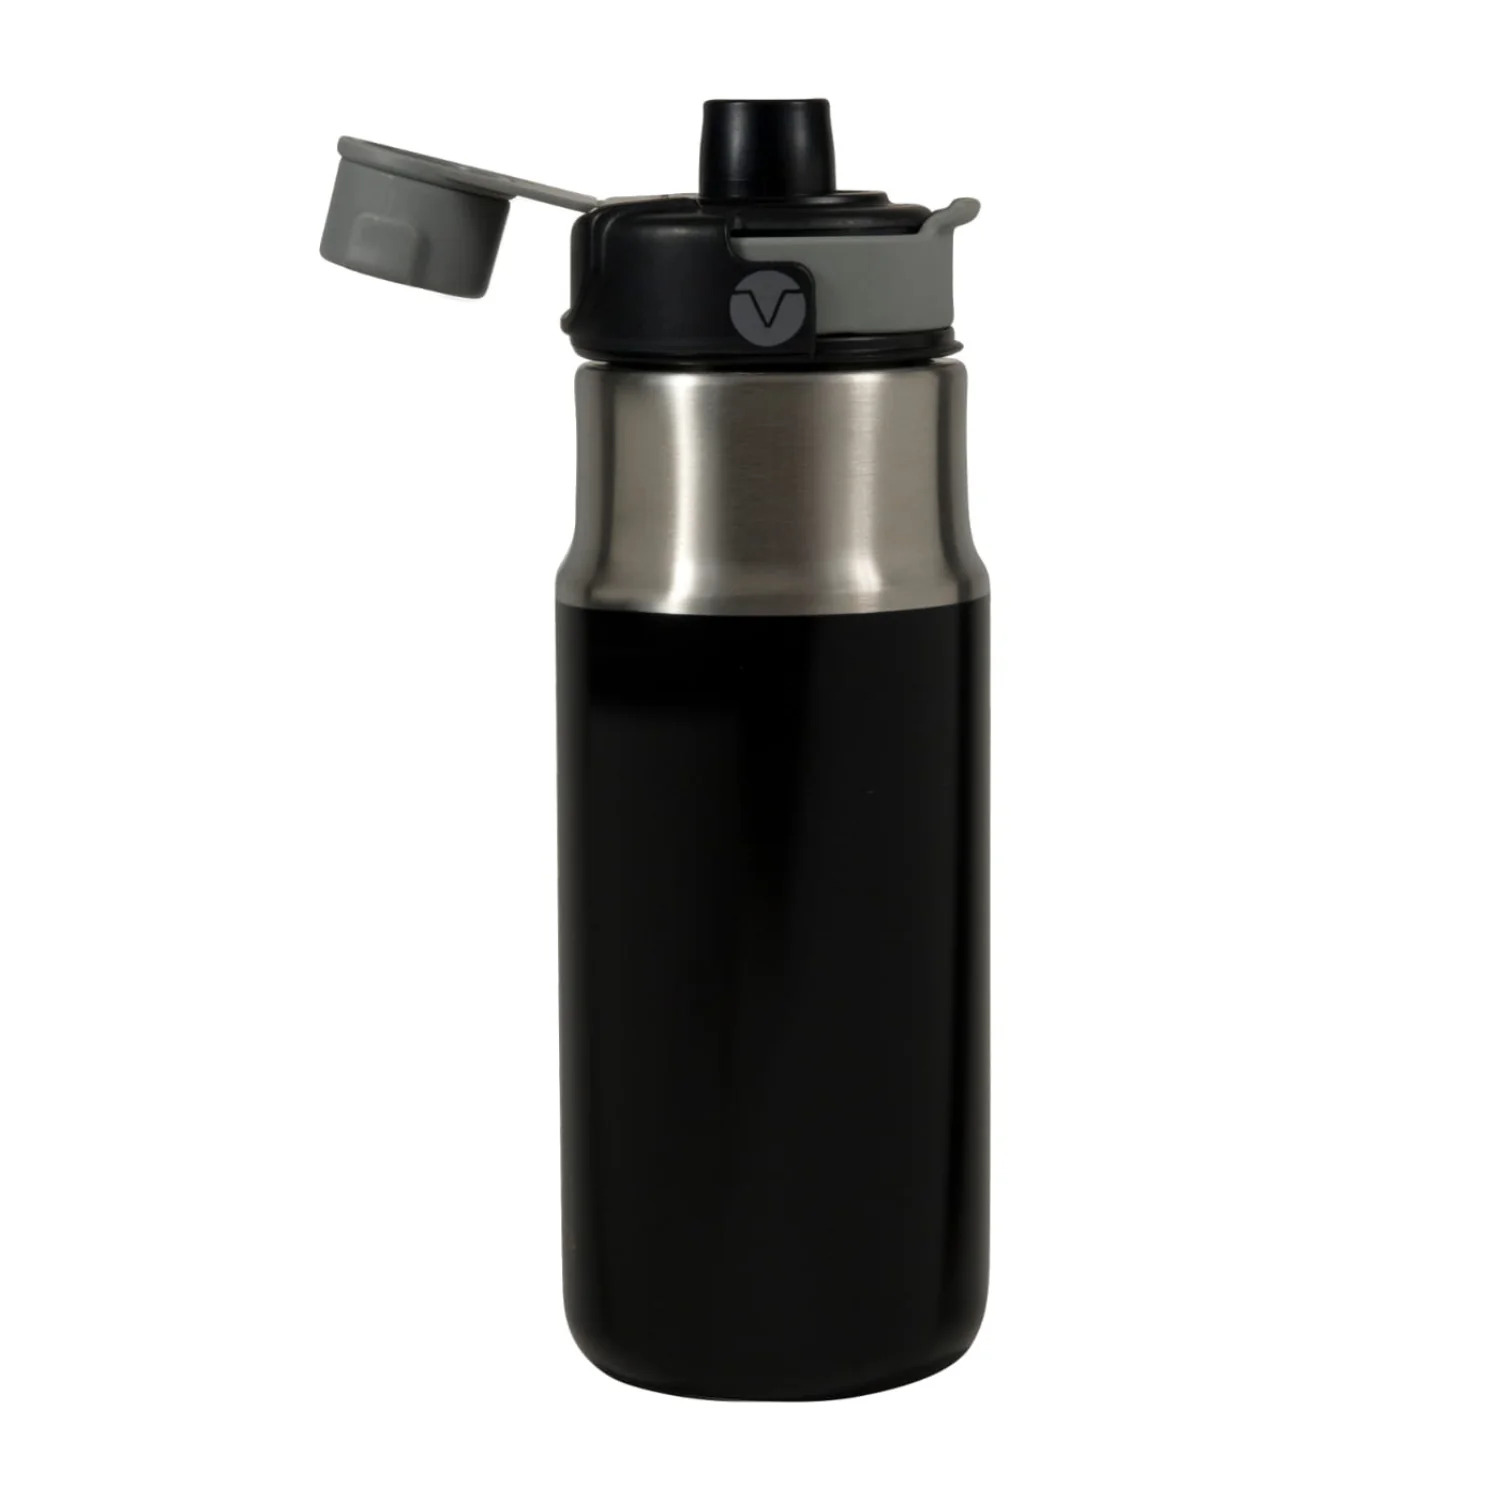 25 oz COOL GEAR Stainless Steel TRAVERSE Bottle with Sipper Lid - image 1 of 1